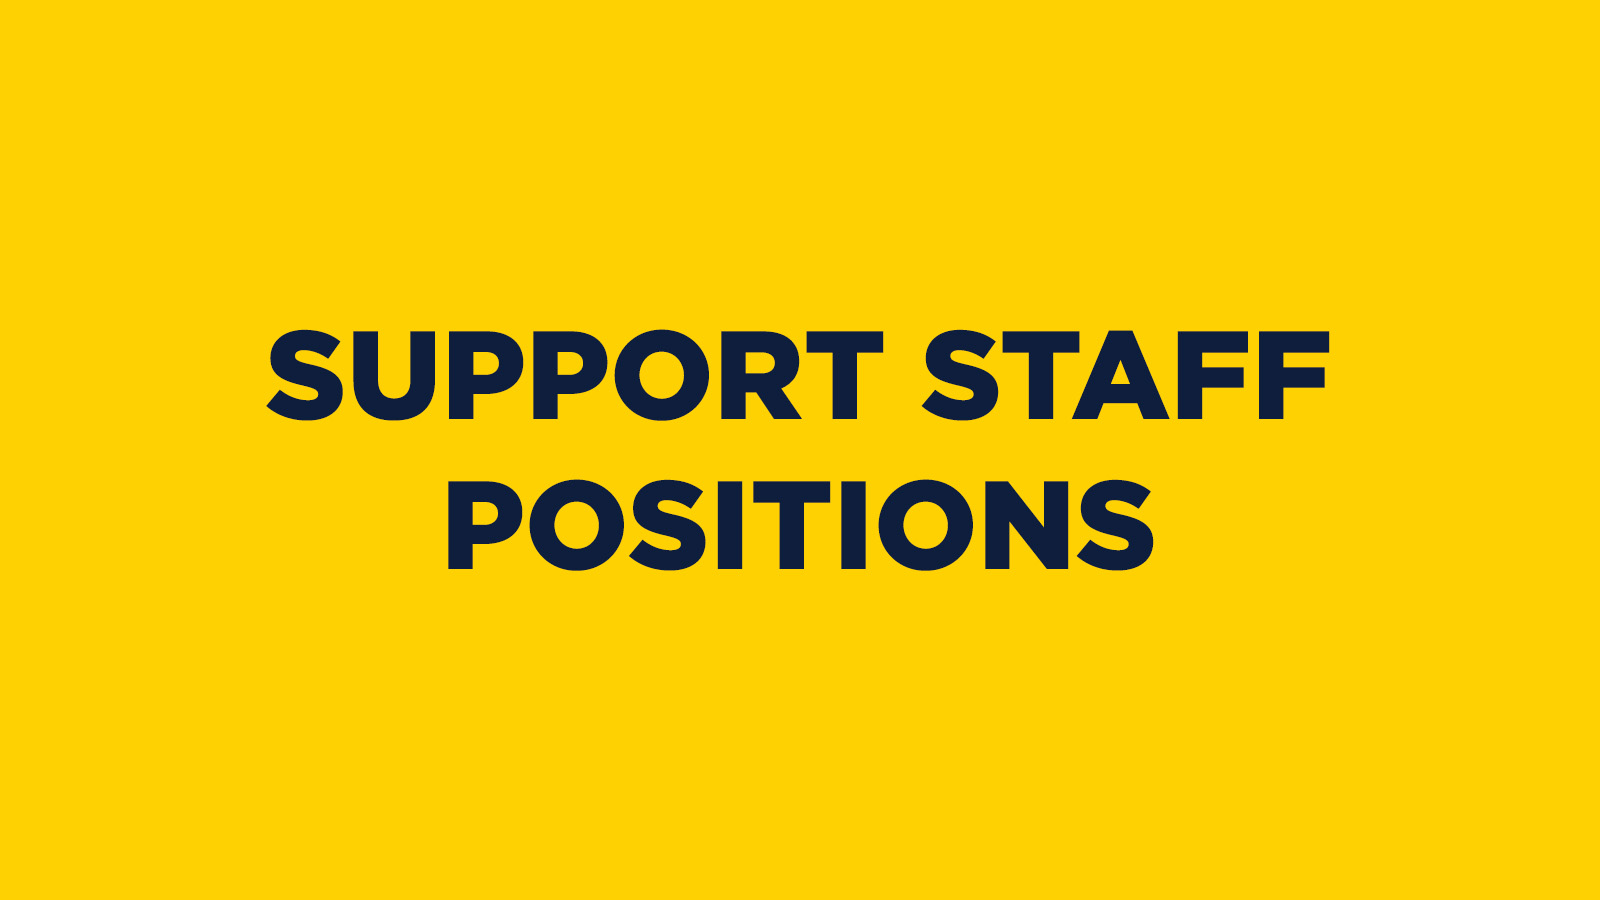 SUPPORT STAFF POSITIONS